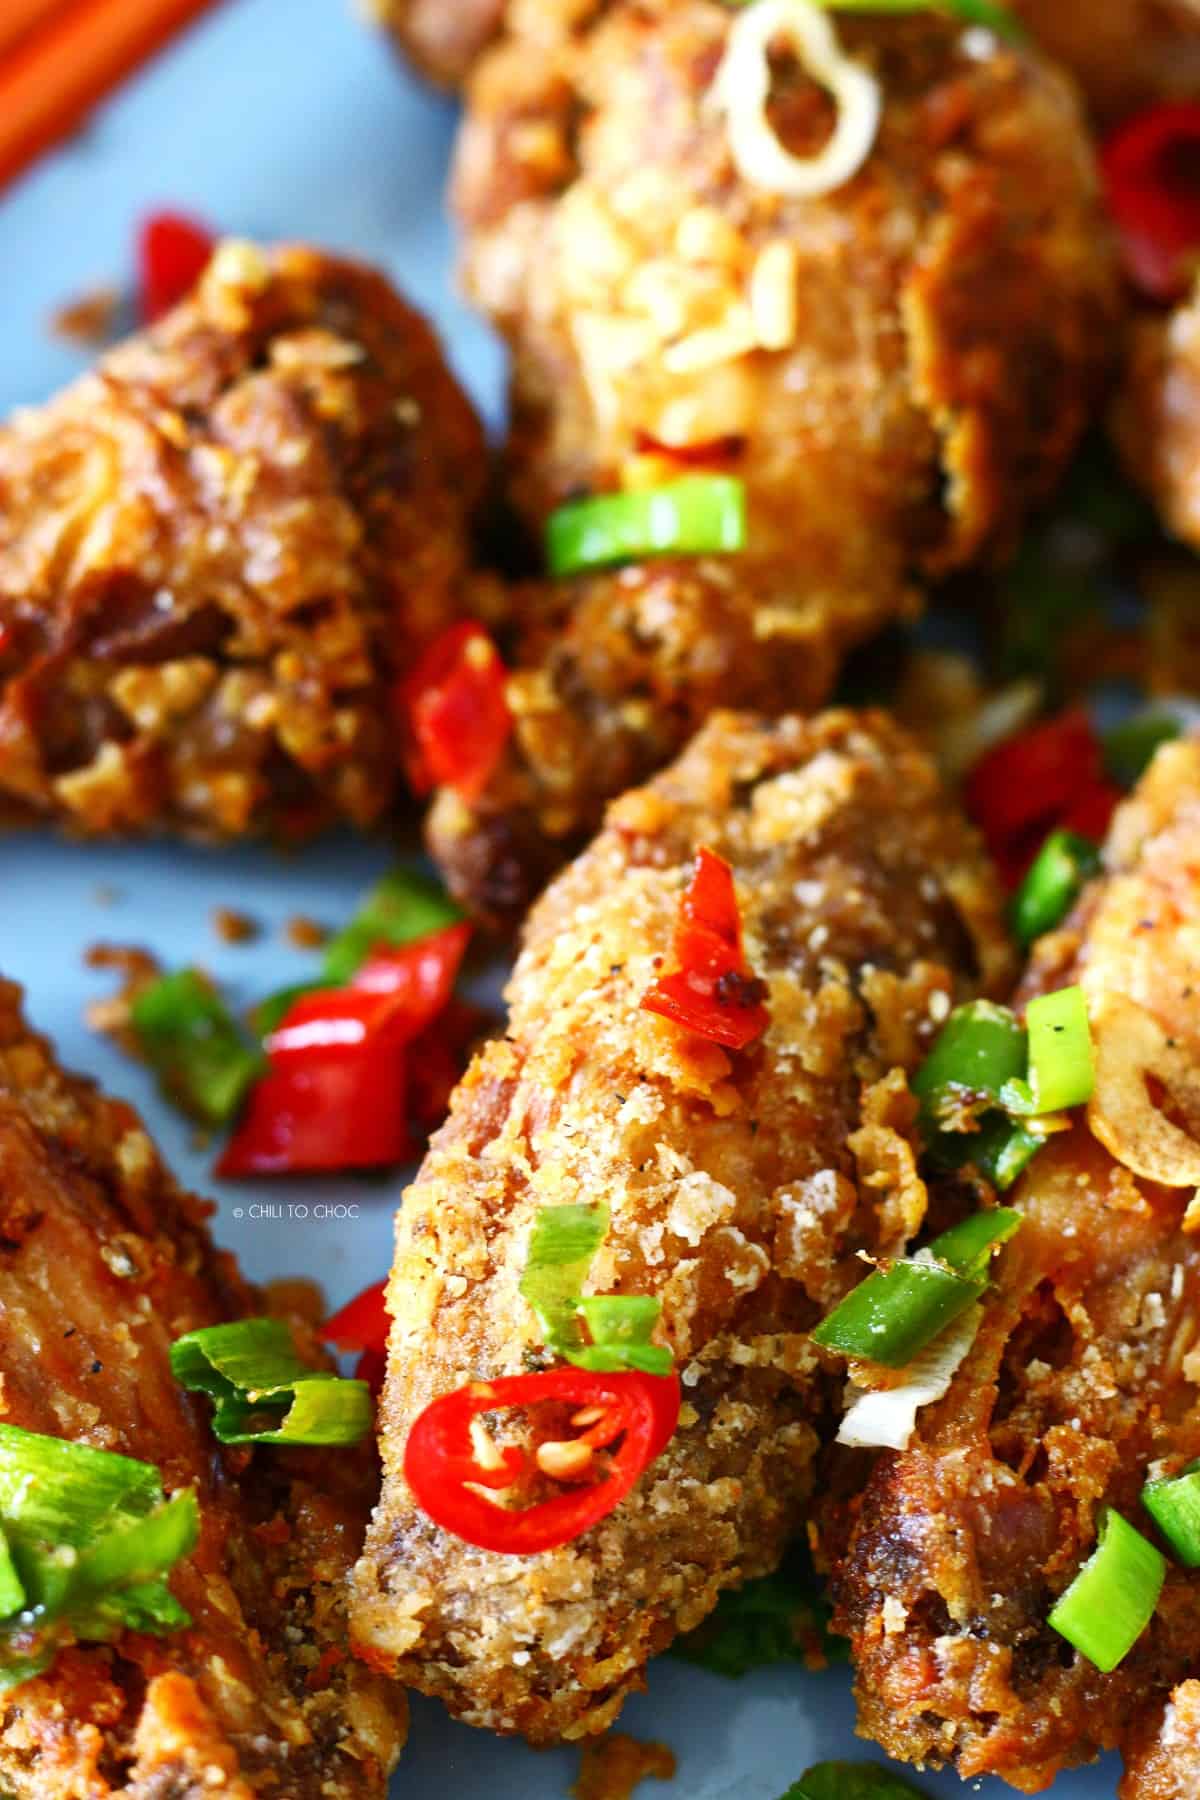 Closeup of salt and pepper chicken wing with red chili and spring onion garnish.